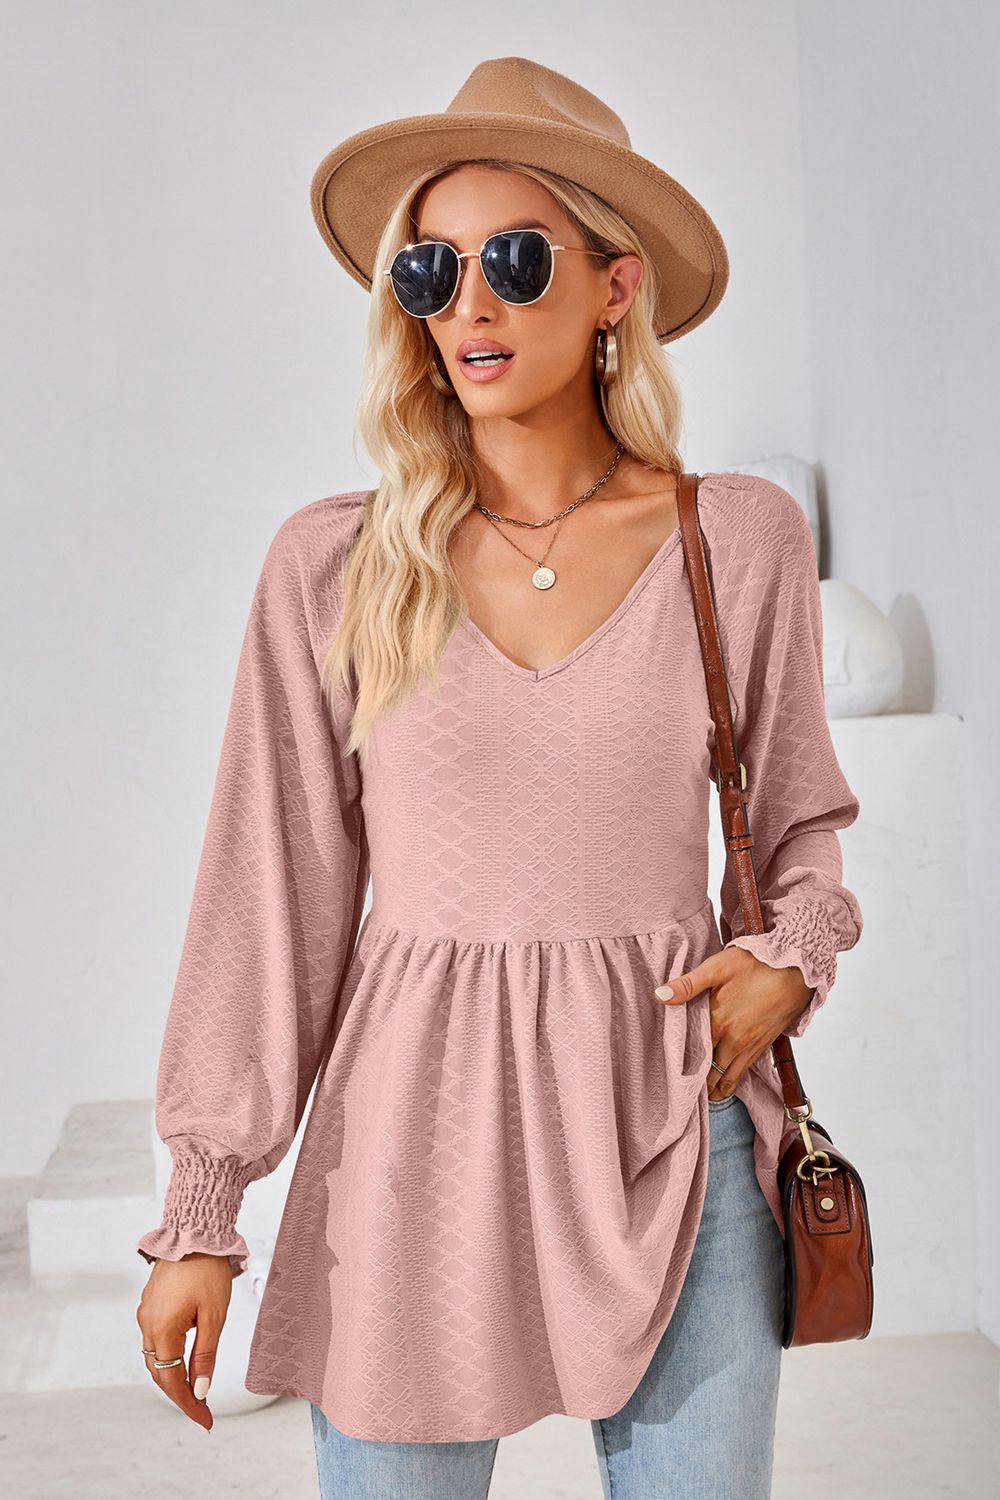 V-Neck Lantern Sleeve Blouse - Pink / S - Women’s Clothing & Accessories - Shirts & Tops - 10 - 2024